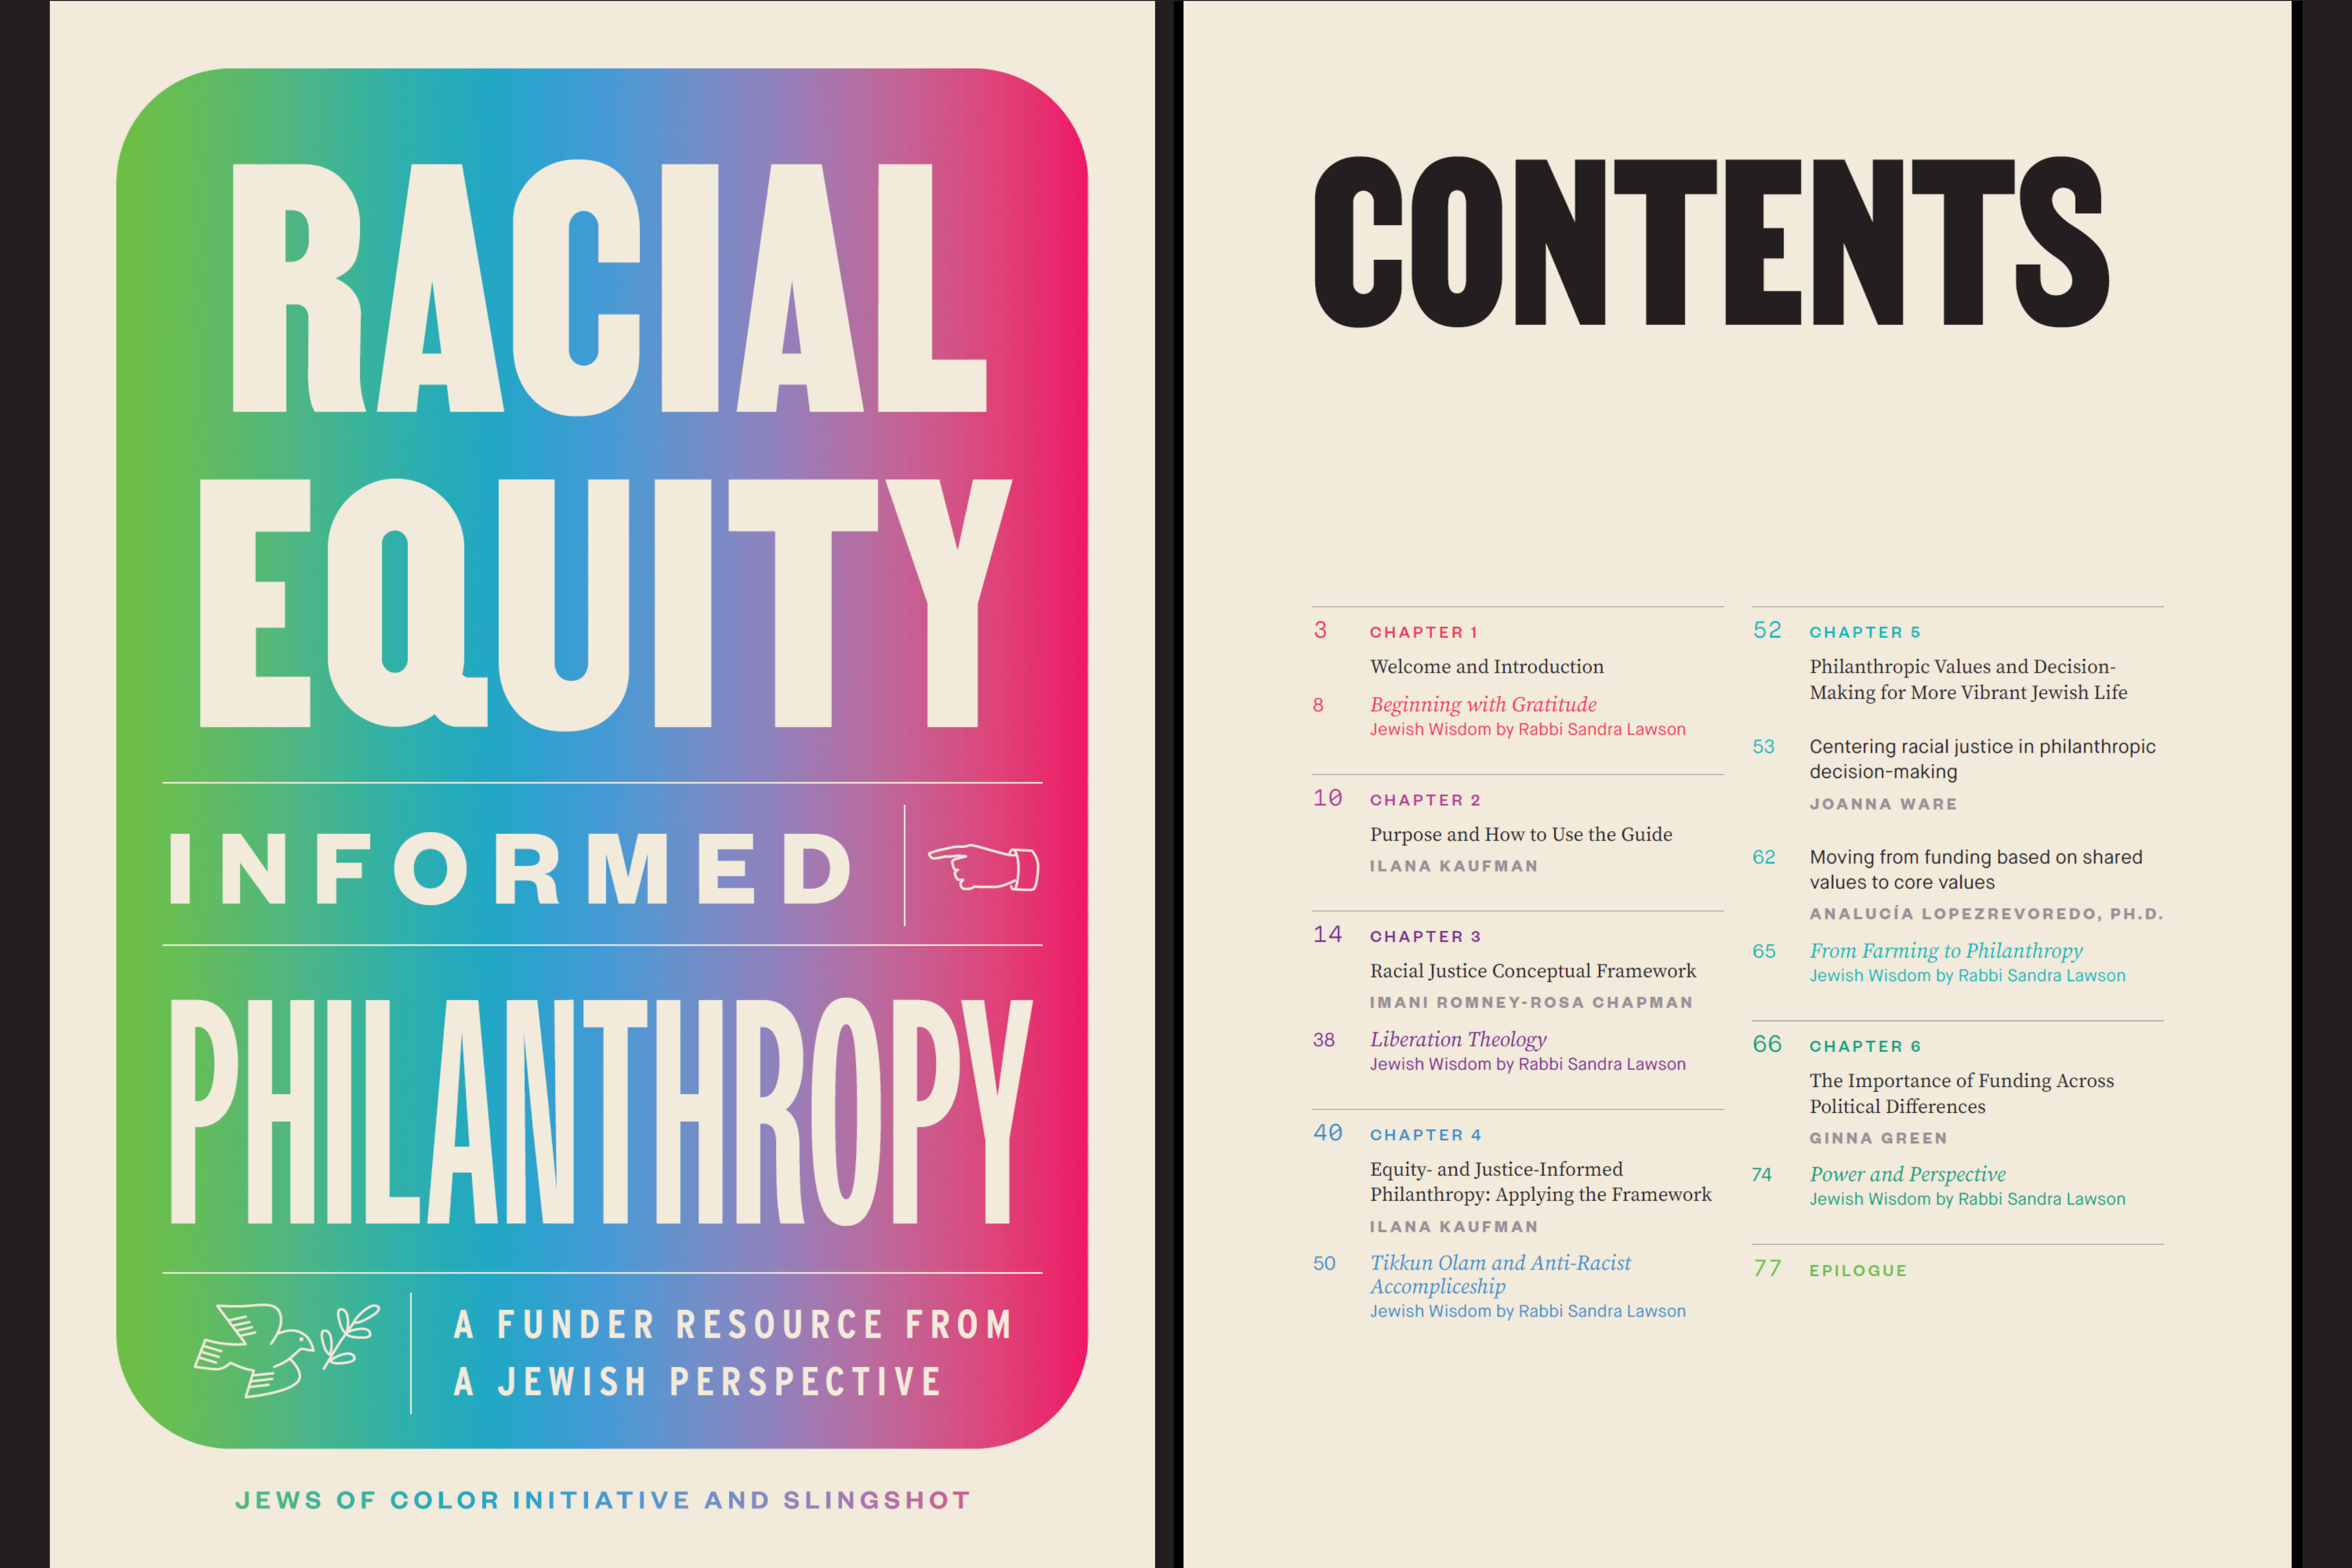 Racial Equity Informed Philanthropy: A Funder Resource from a Jewish Perspective; Jews of Color Initiative and Slingshot; Table of Contents (full text below)